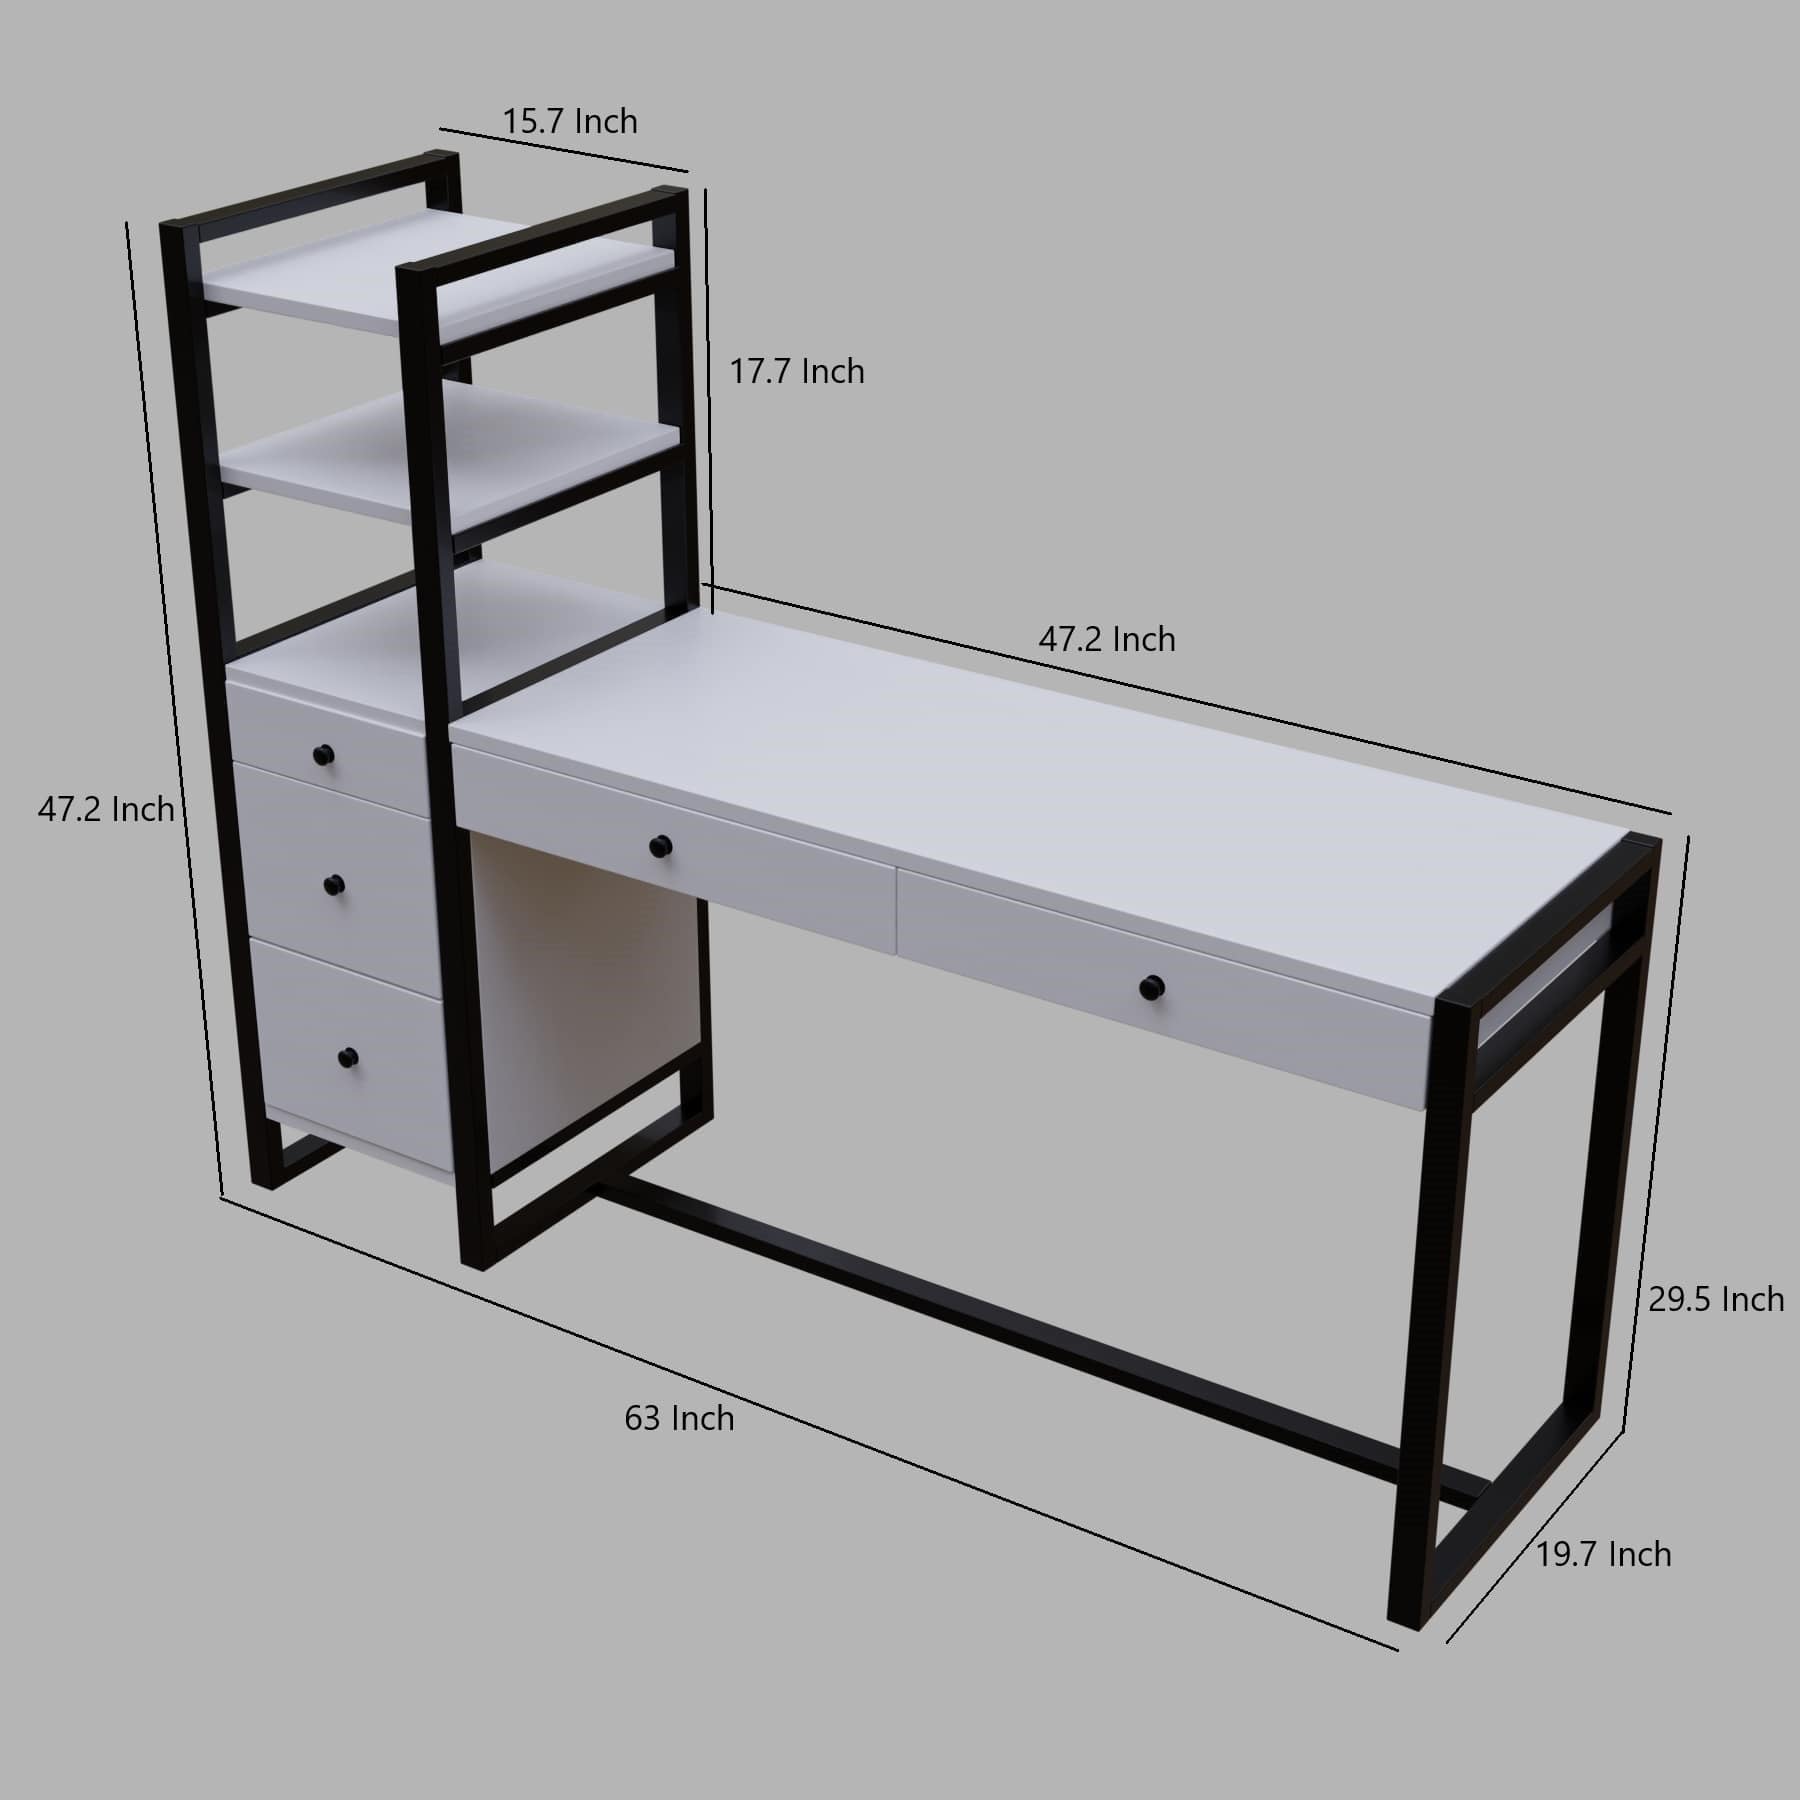 Best study table with storage design have drawer & open storage shelve, perfect for engineers